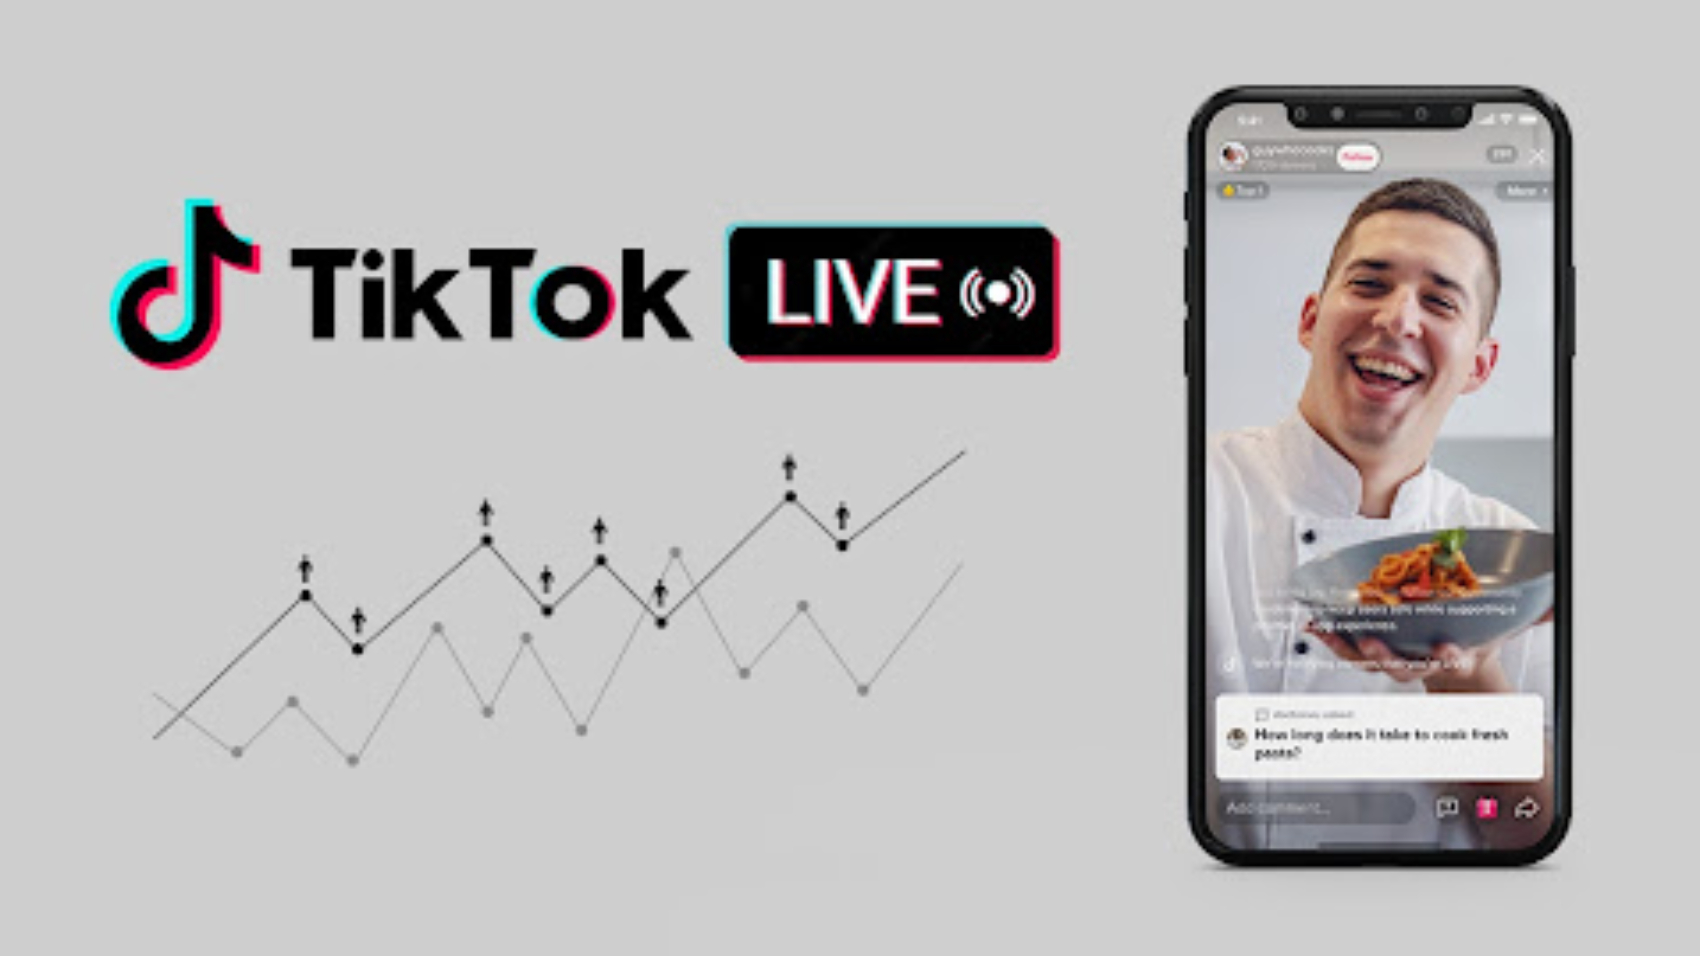 How-To-Go-Live-On-TikTok-To-Improve-Engagement-With-Your-Followers.jpg